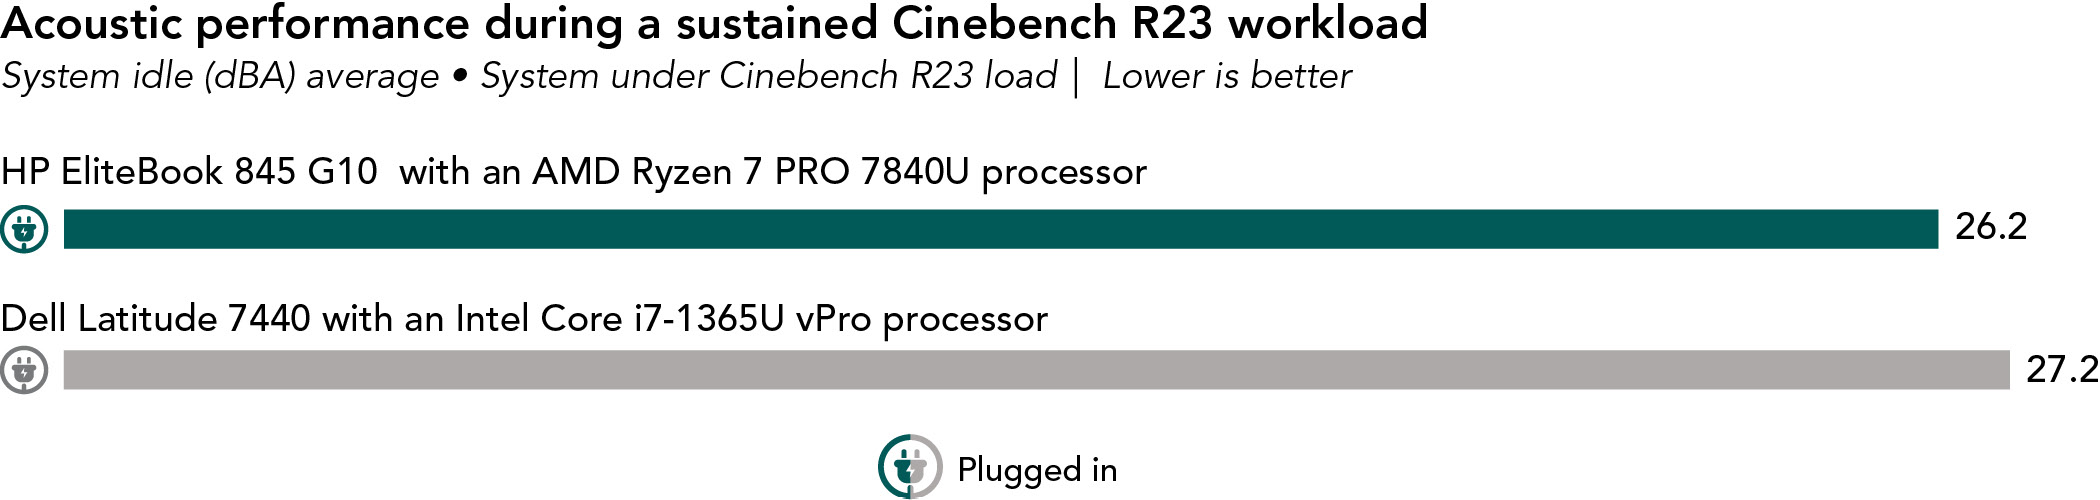 Chart showing acoustic performance during a sustained Cinebench R23 workload. Lower is better. HP EliteBook 845 G10 shows average of 26.2 decibels. Dell Latitude 7440 shows average of 27.2 decibels. 